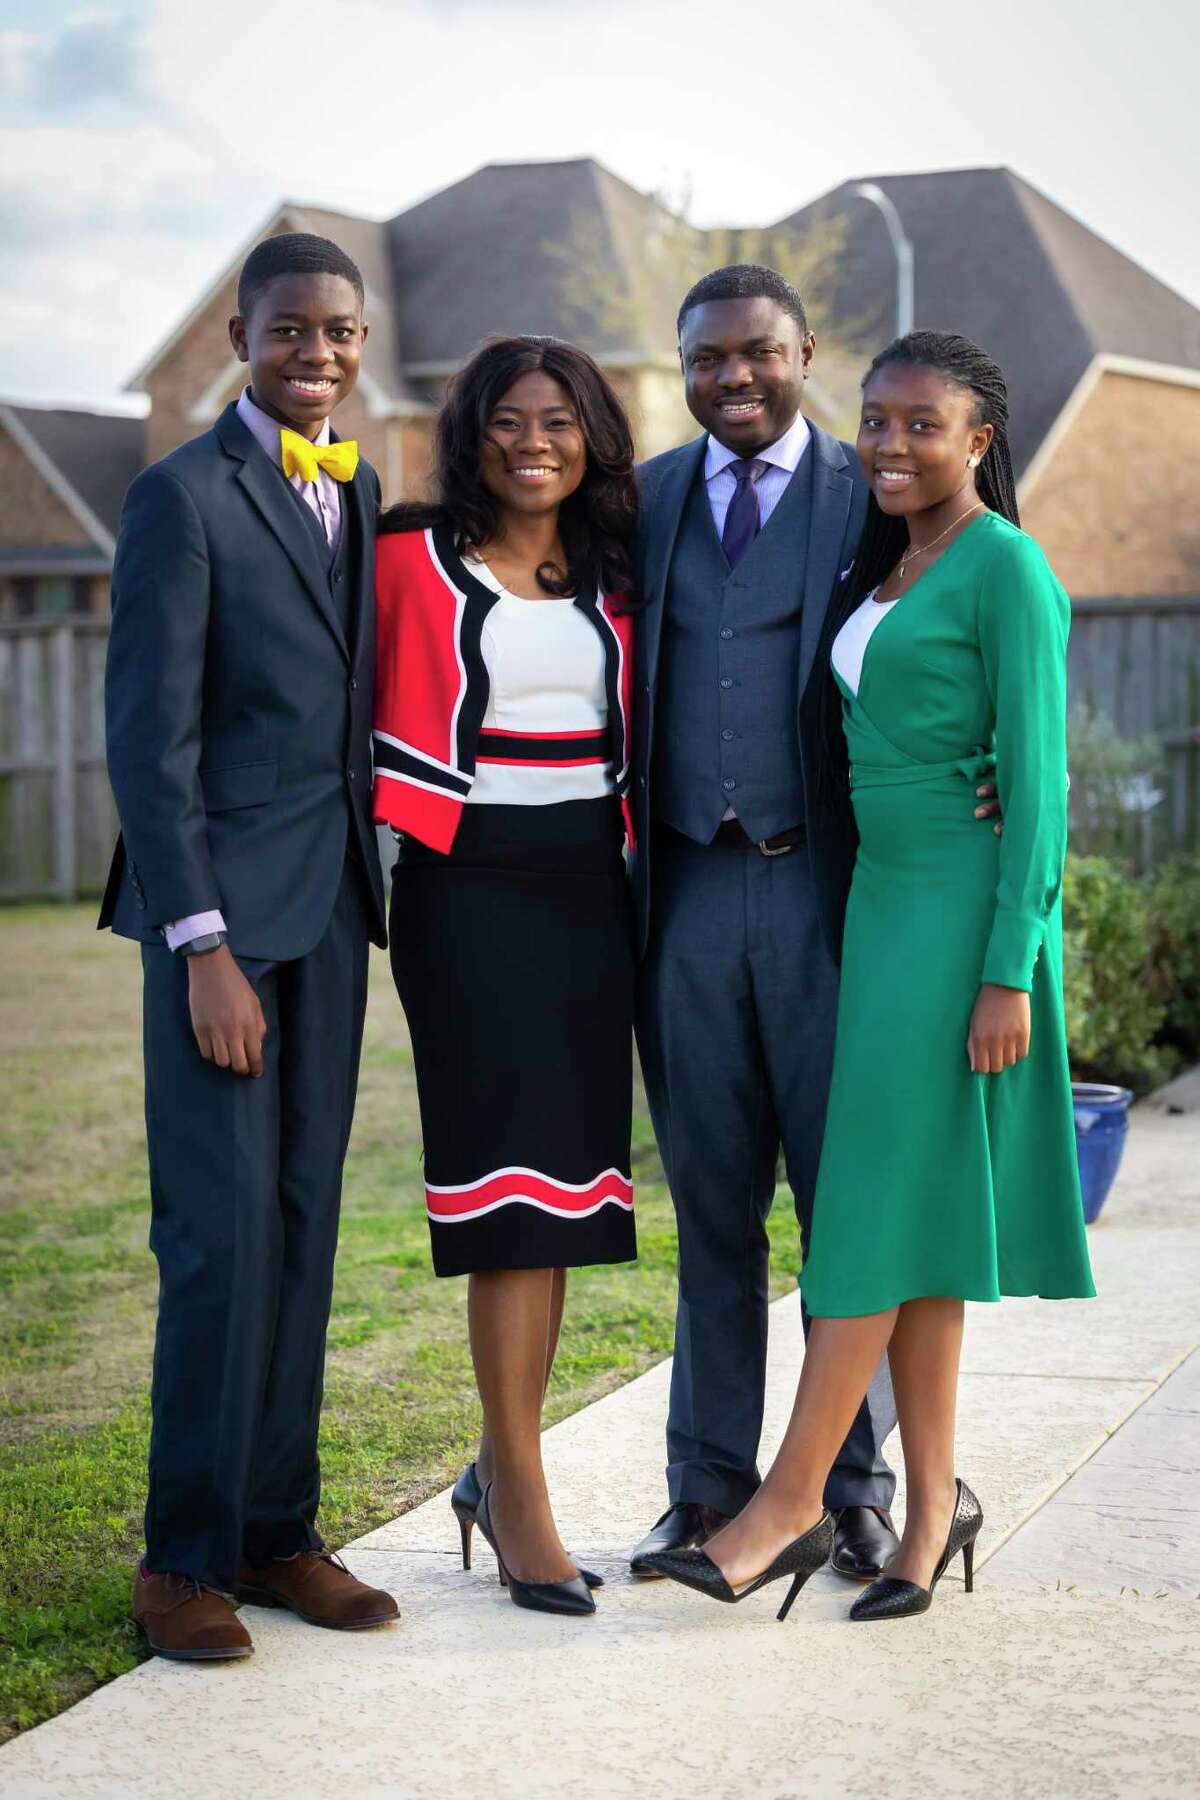 The Owoeye family in their Richmond home on Monday, March 28, 2022. Father Bola and mother Yemi, and daughter Kanyinsola, 15, and son Jola, 14.